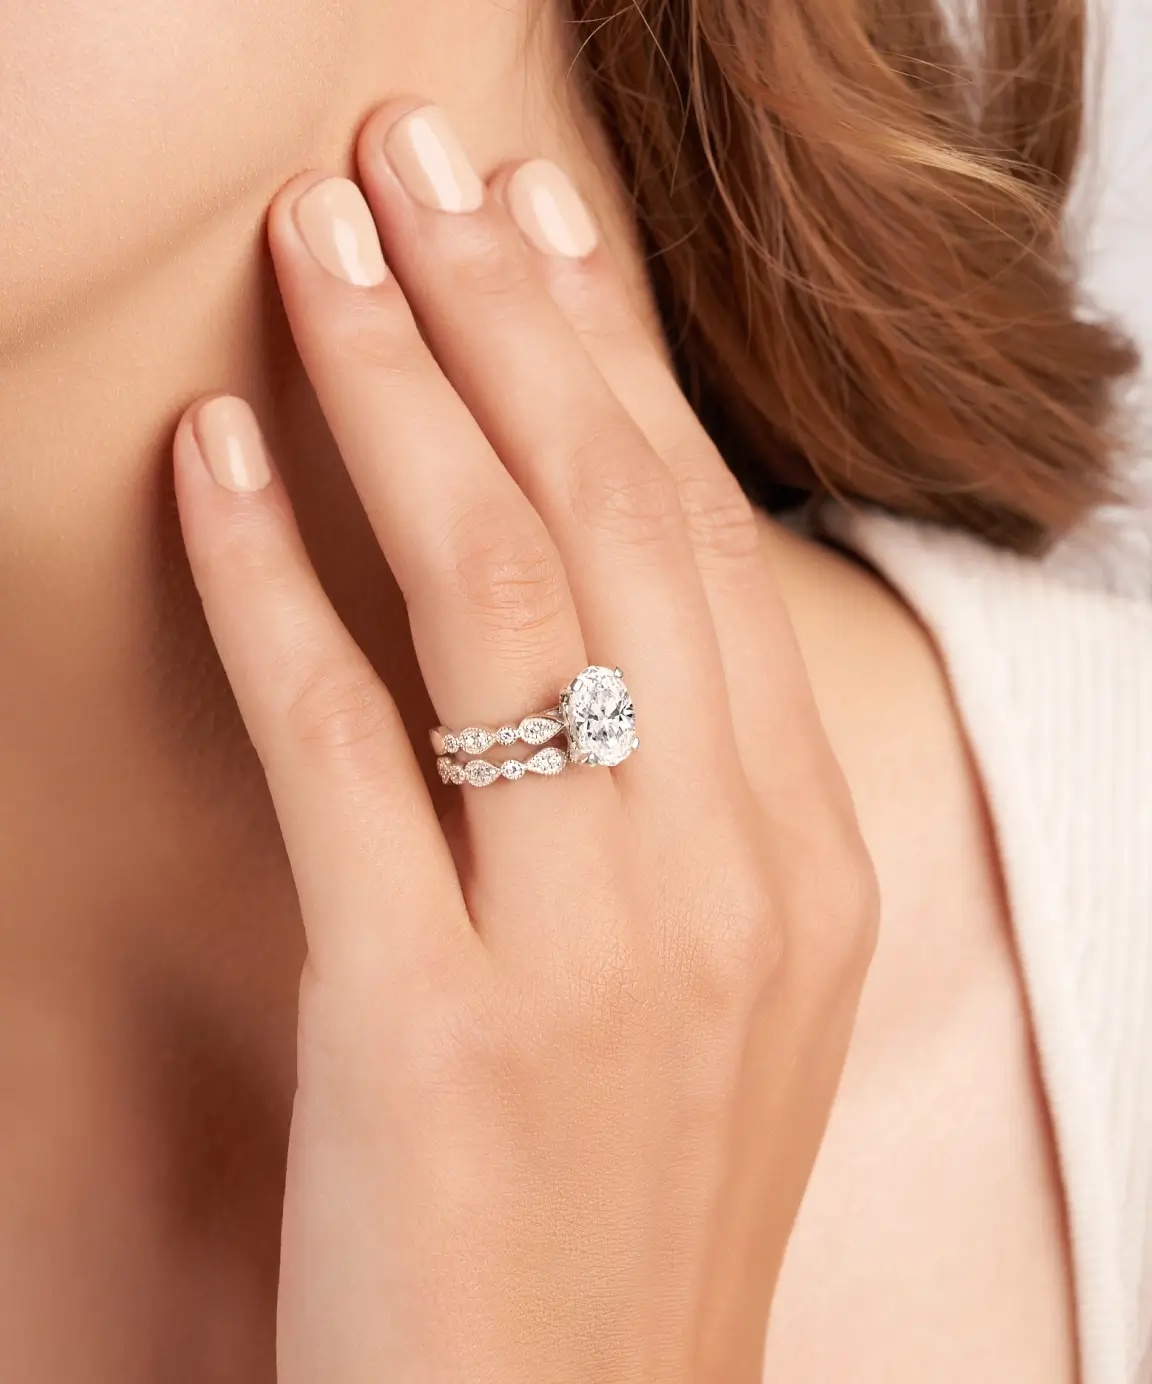 Find Your Match: The Ideal Wedding Band for Oval Diamond Engagement Rings